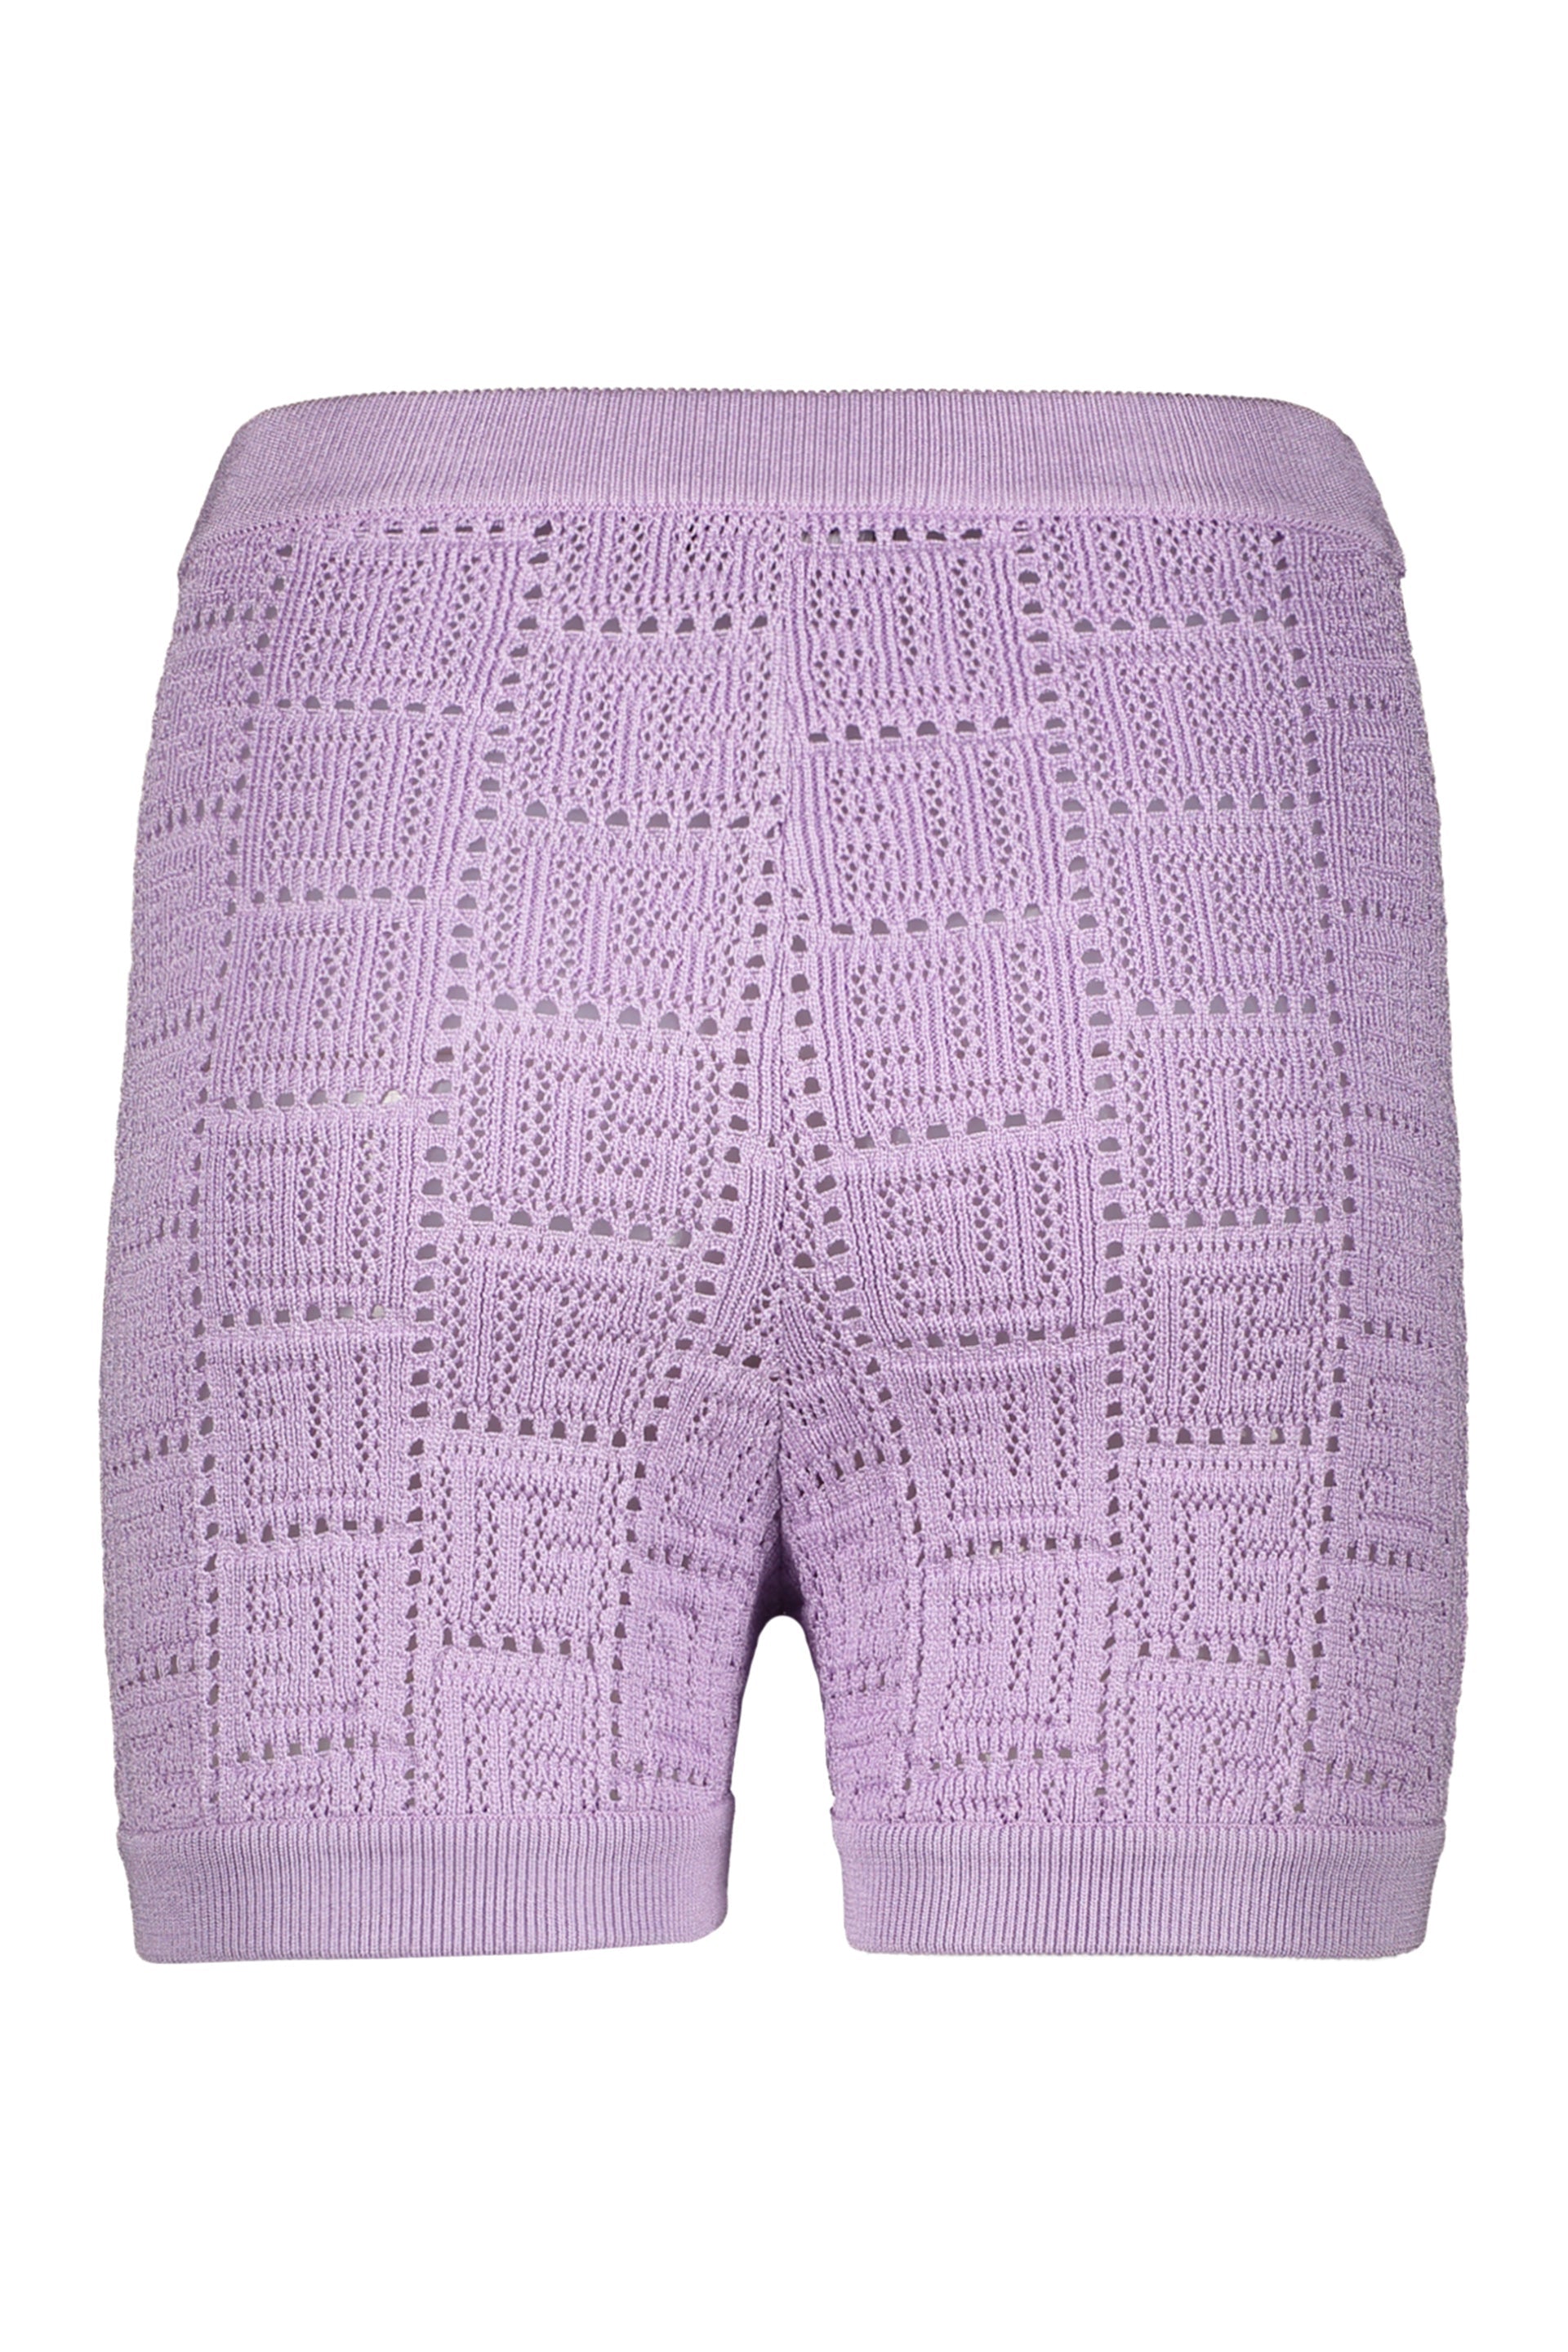 Balmain-OUTLET-SALE-Knitted-shorts-Hosen-ARCHIVE-COLLECTION-2.jpg